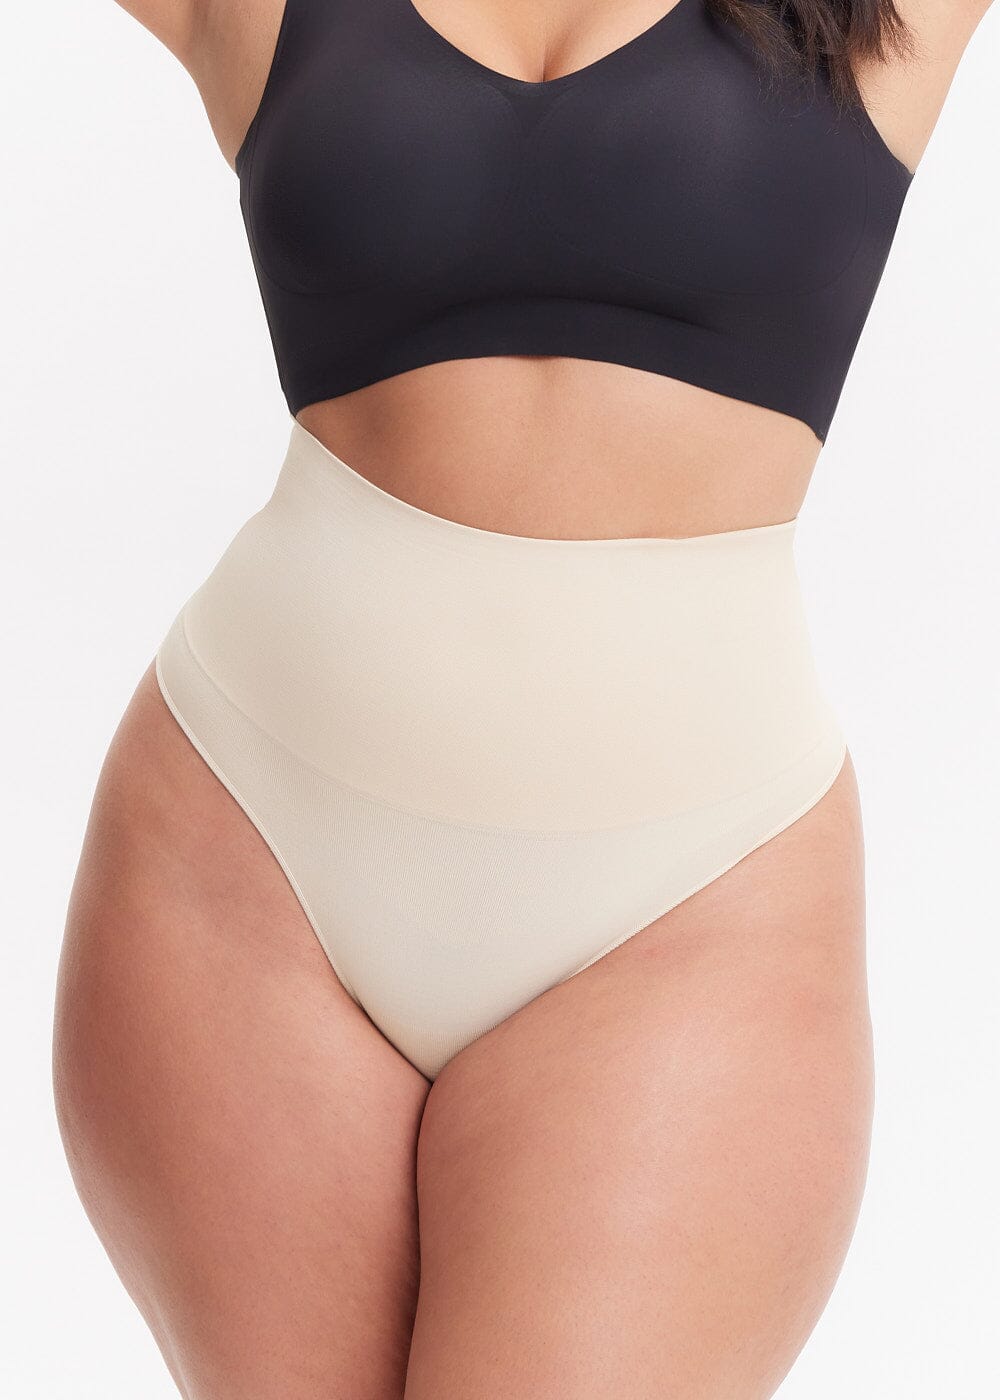 Essential Thong Shaper - She's Waisted